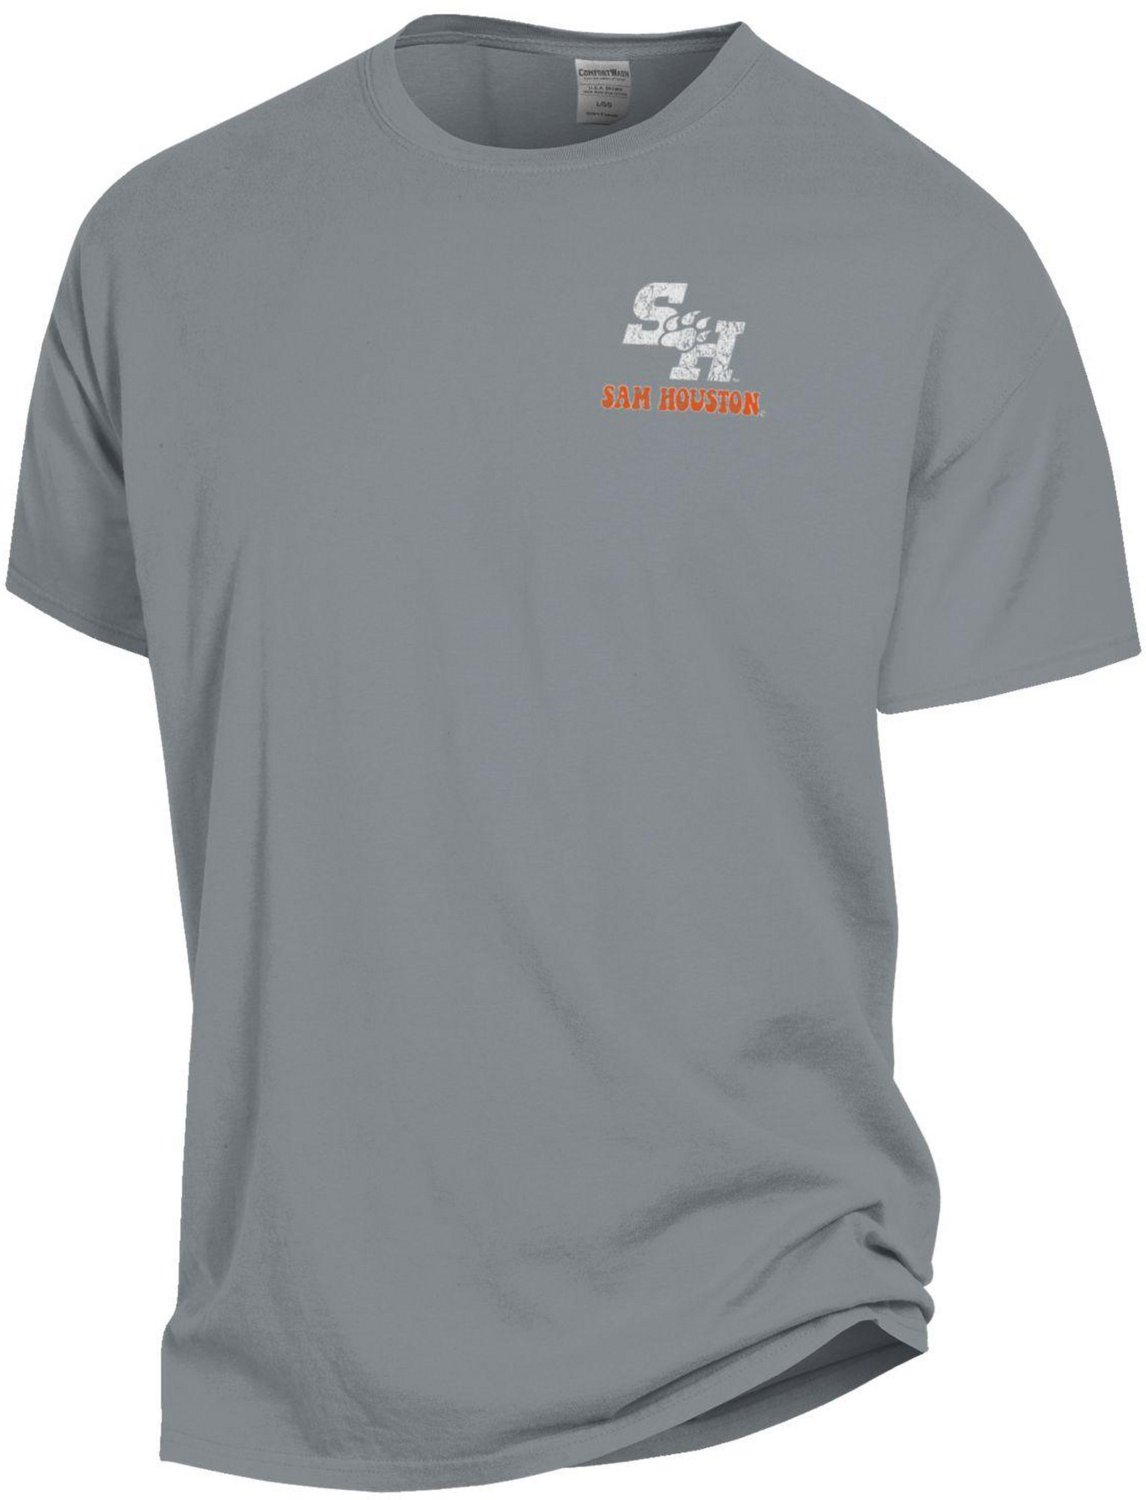 Academy Sports + Outdoors GEAR FOR SPORTS Men's Sam Houston State